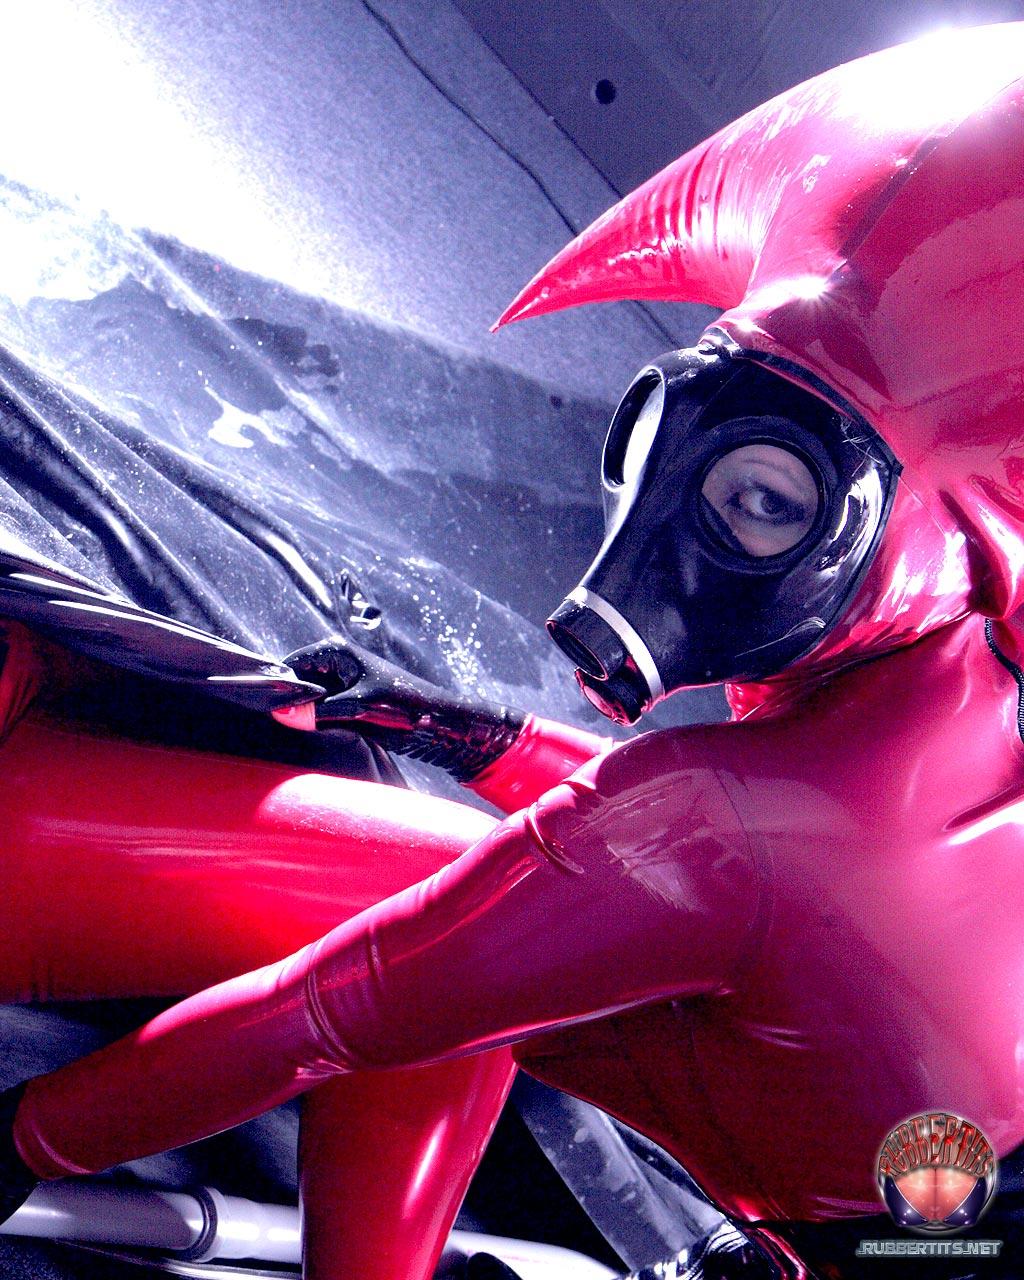 Lesbians Darkwing Zero & Lady Cassandra wear latex costumes during SFW play foto porno #422975565 | Rubber Tits Pics, Darkwing Zero, Lady Cassandra, Latex, porno mobile